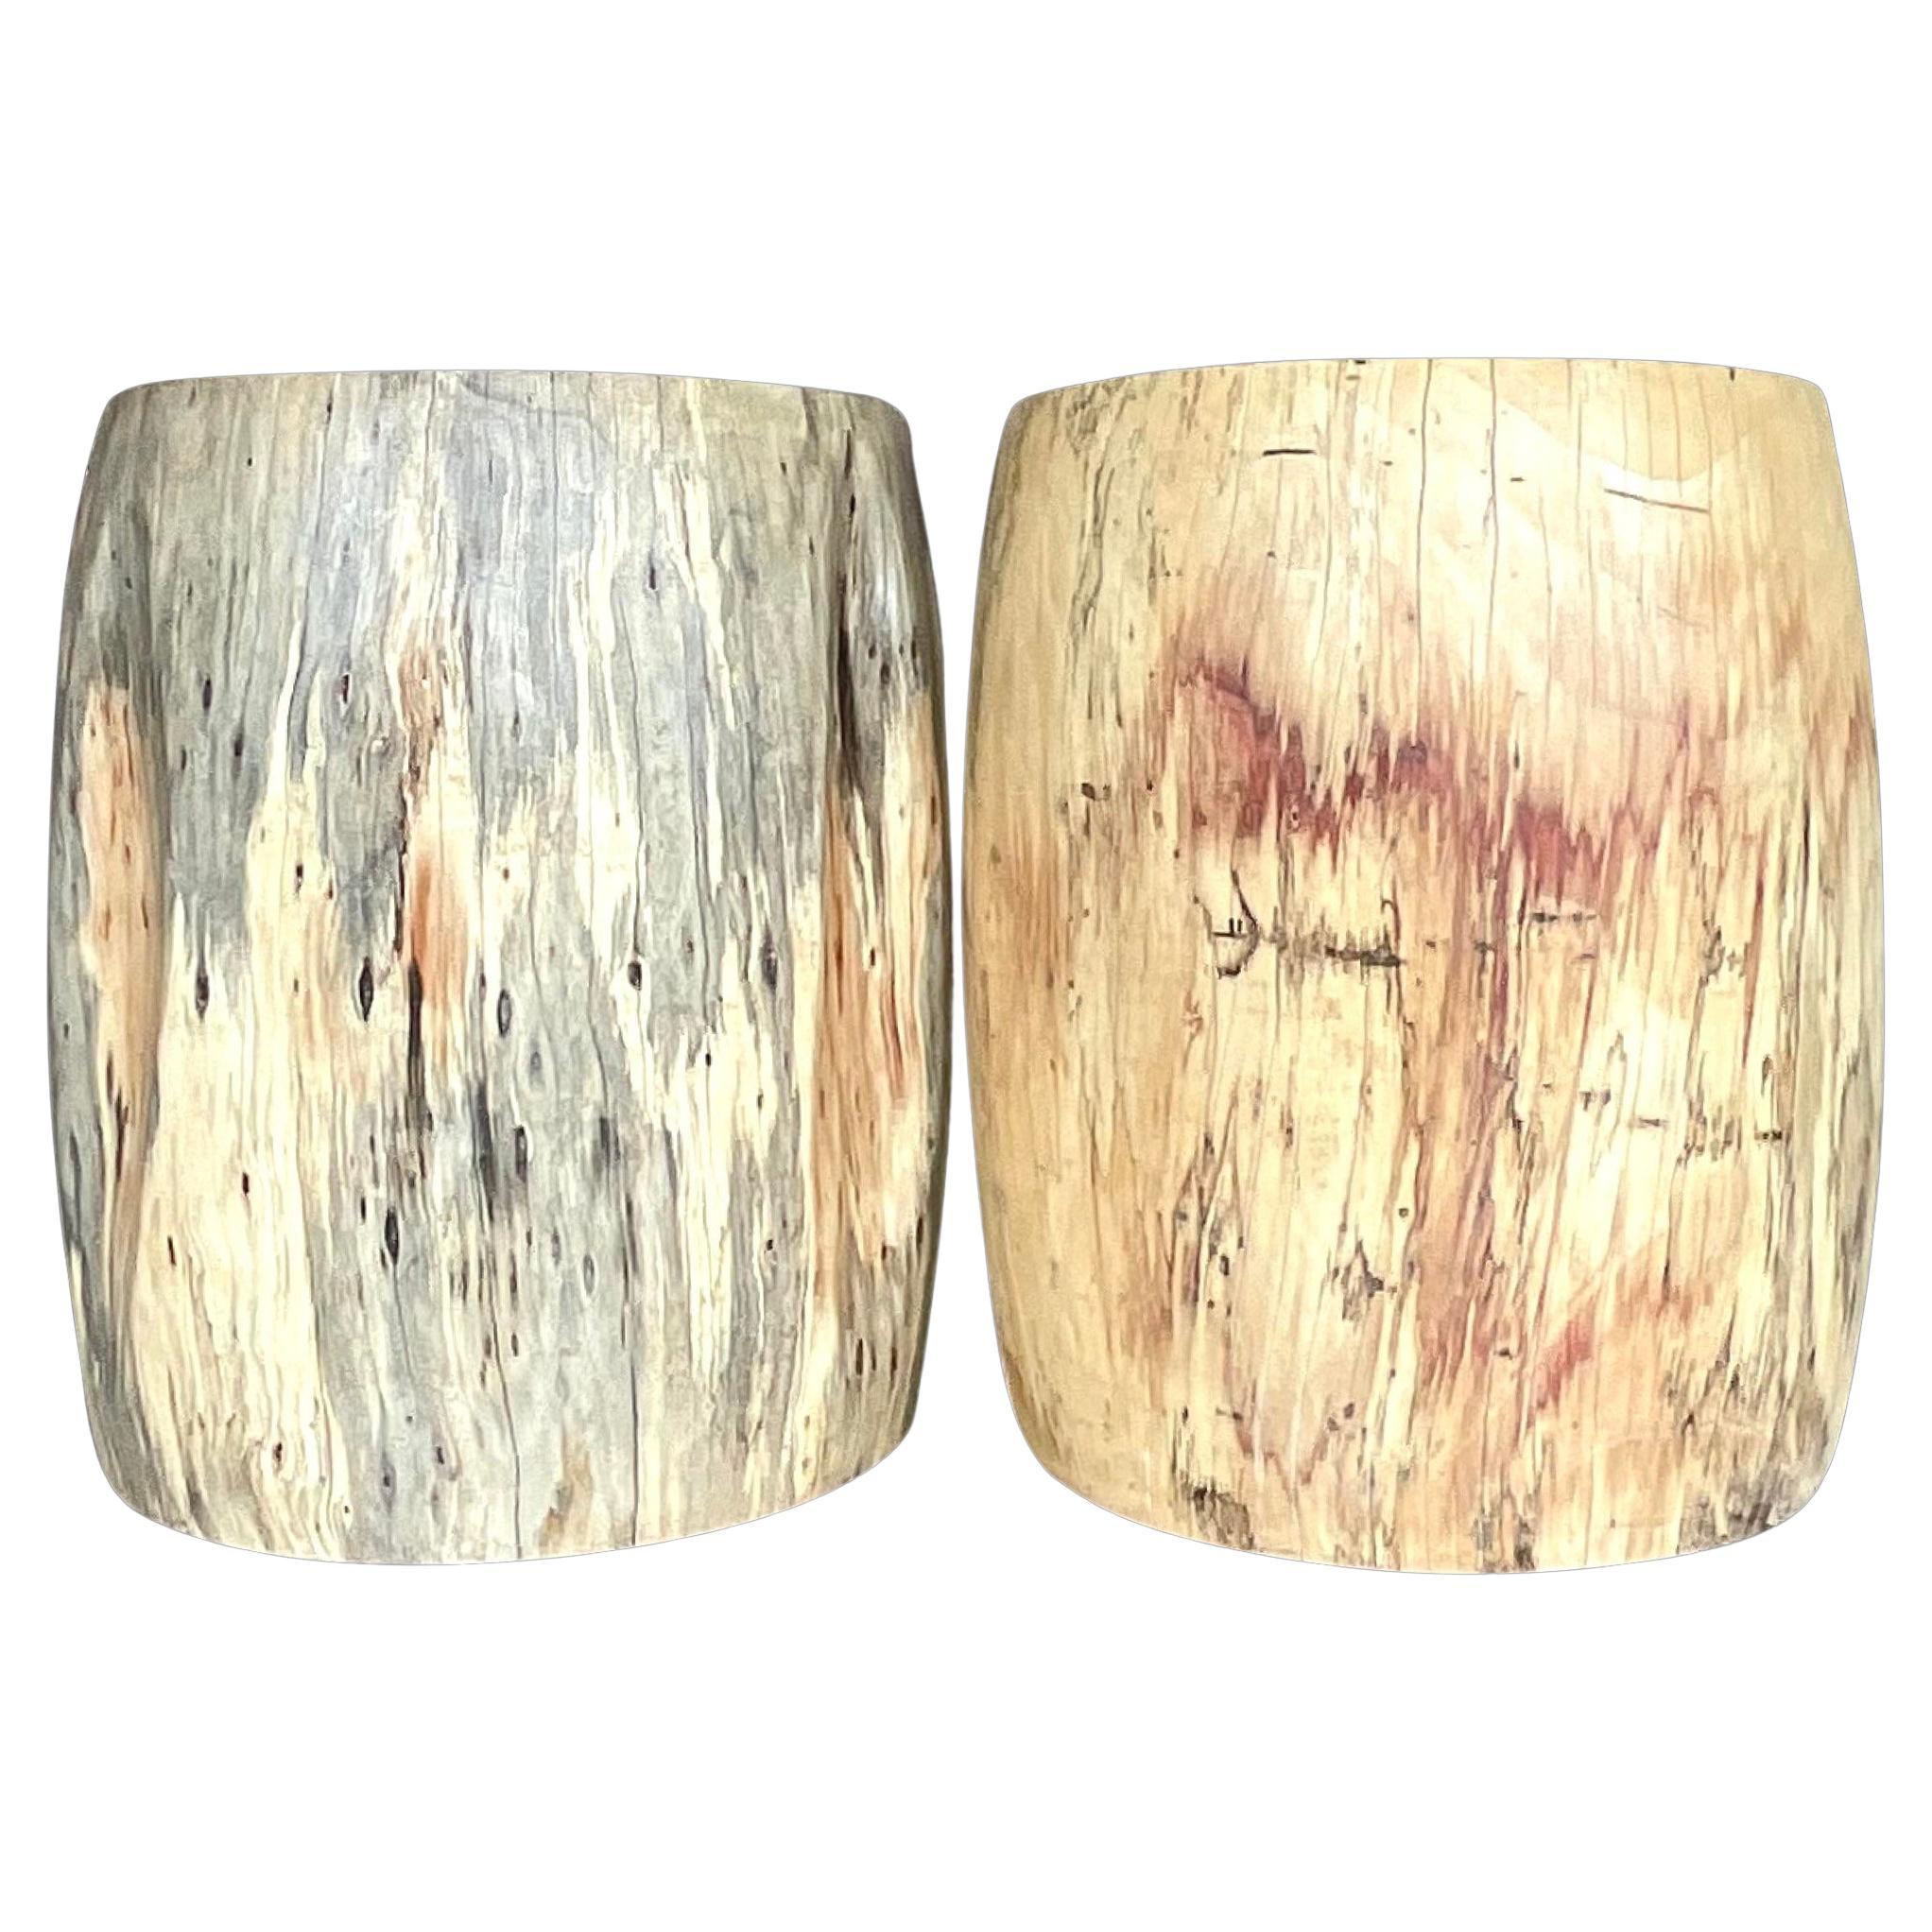 Late 20th Century Vintage Boho Tree Trunk Low Stools - a Pair For Sale